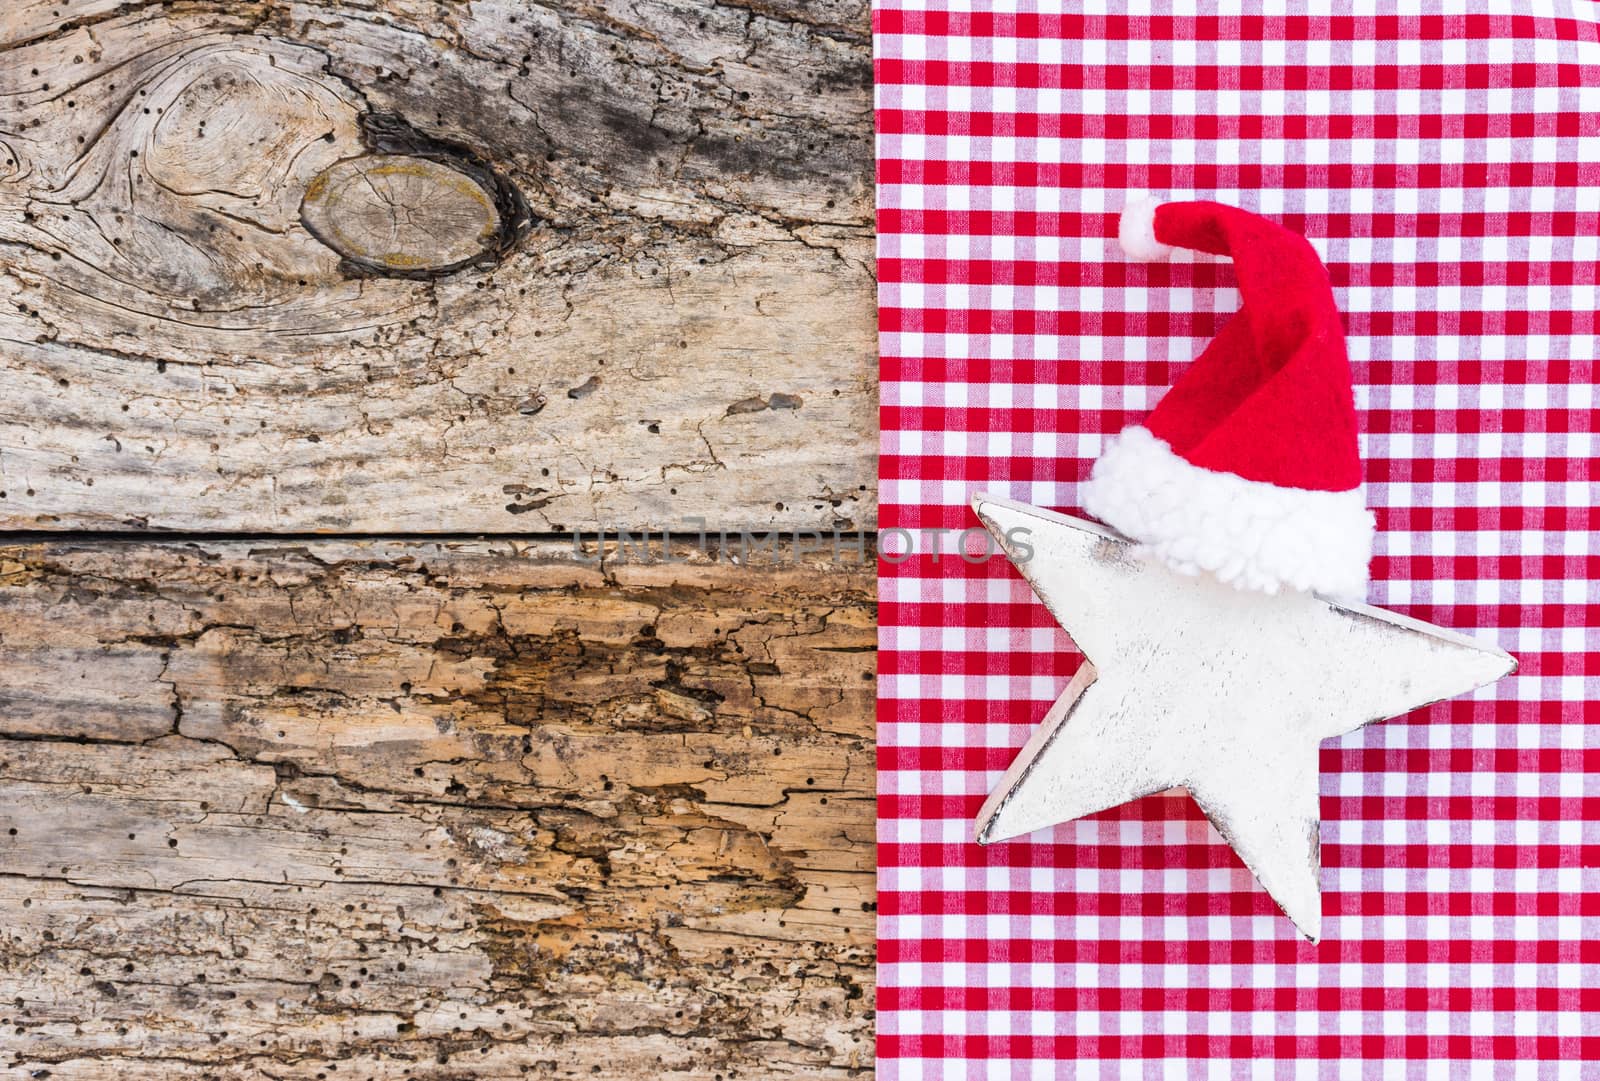 Amusing Christmas decoration, white wooden star shape with red Santa Claus cap